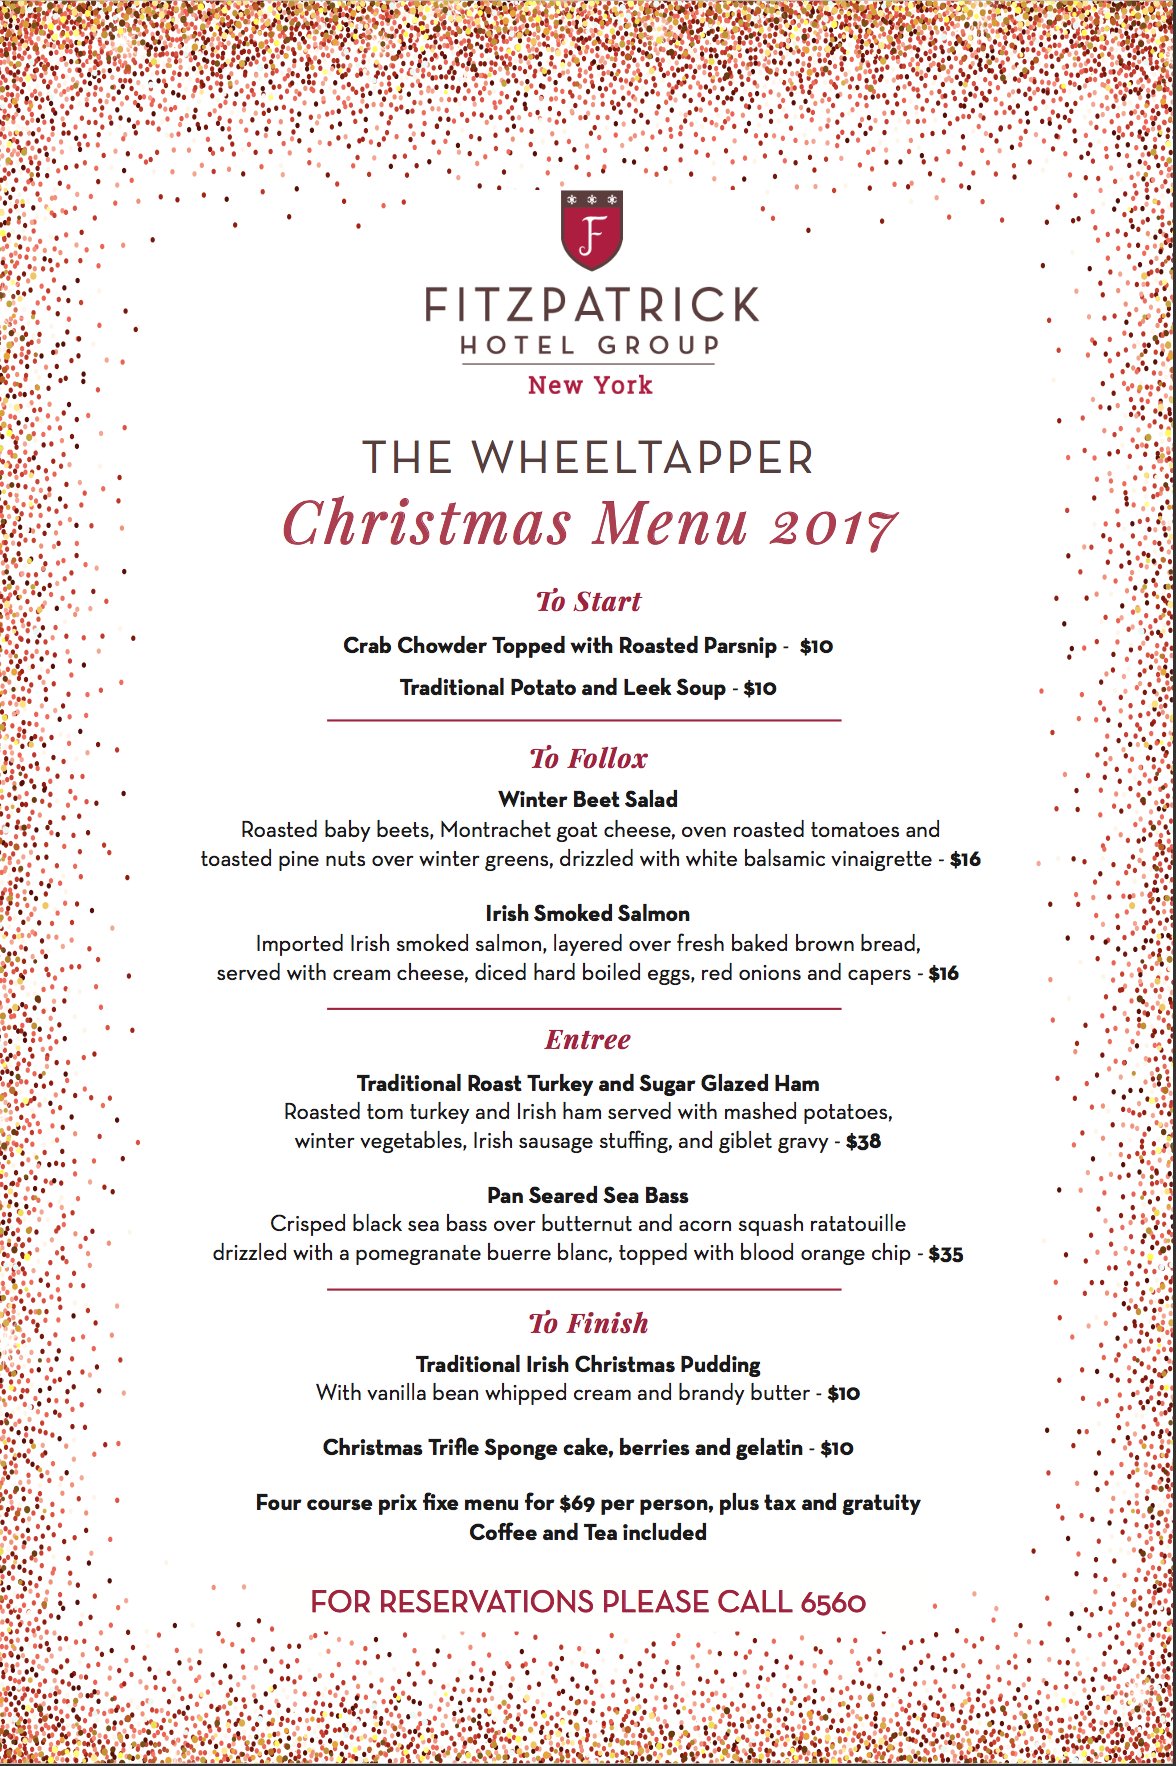 Fitzpatrick Hotels On Twitter Our Chefs Have Been Busy Creating The Perfect Festive Feast For Christmas Day Both Our Restaurants Check Out Our Christmas Day Menus For Each Of Our Hotels What S